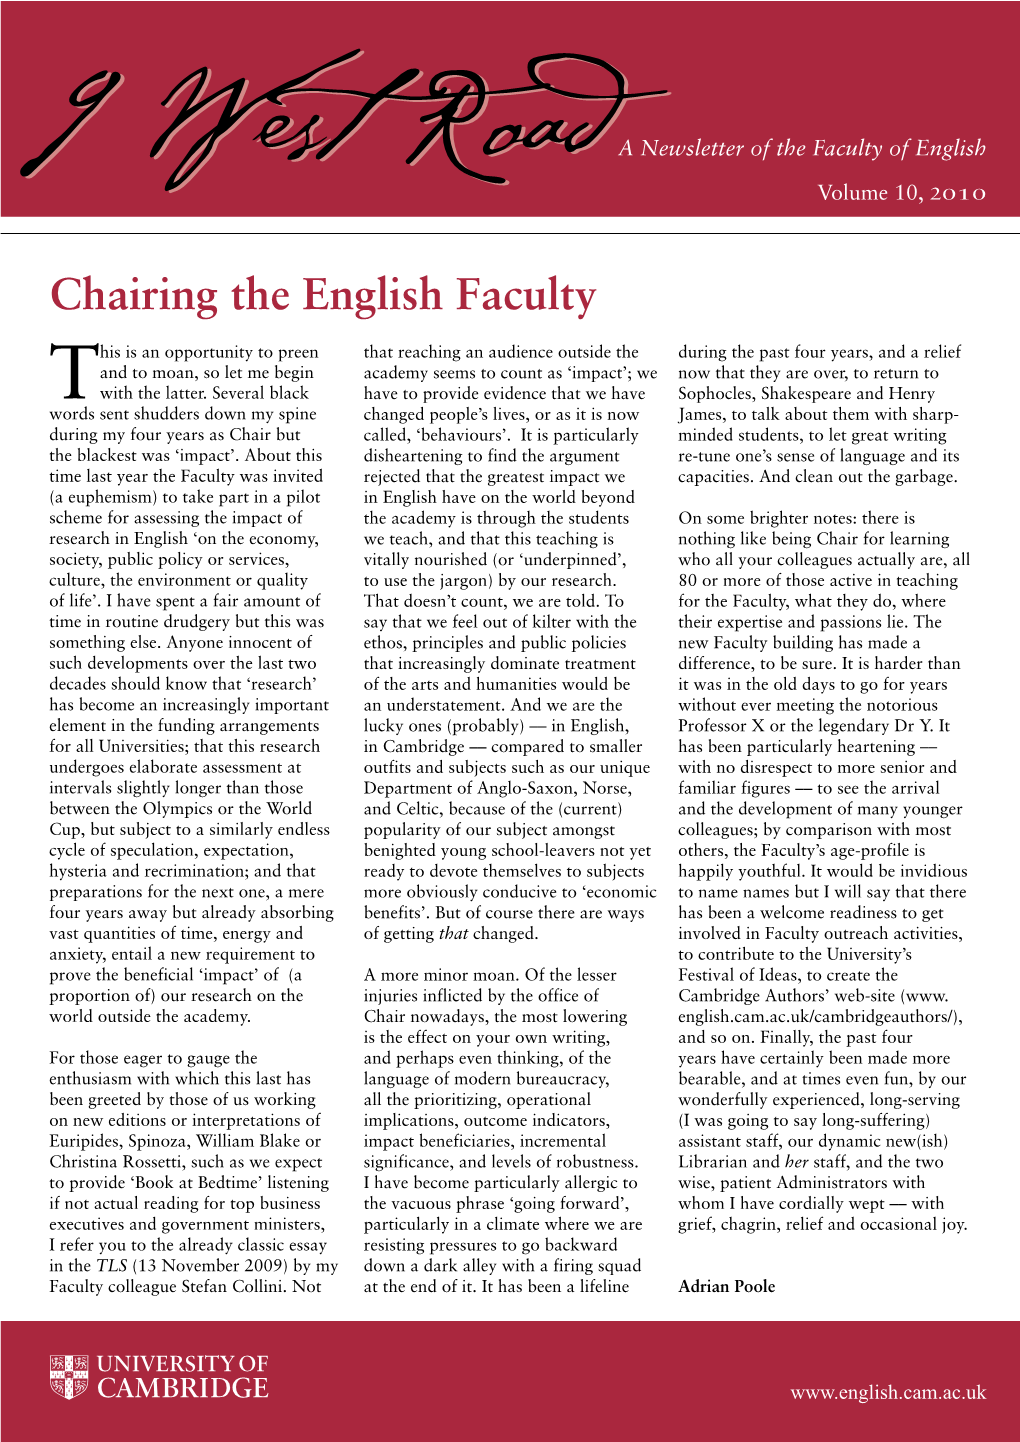 Chairing the English Faculty